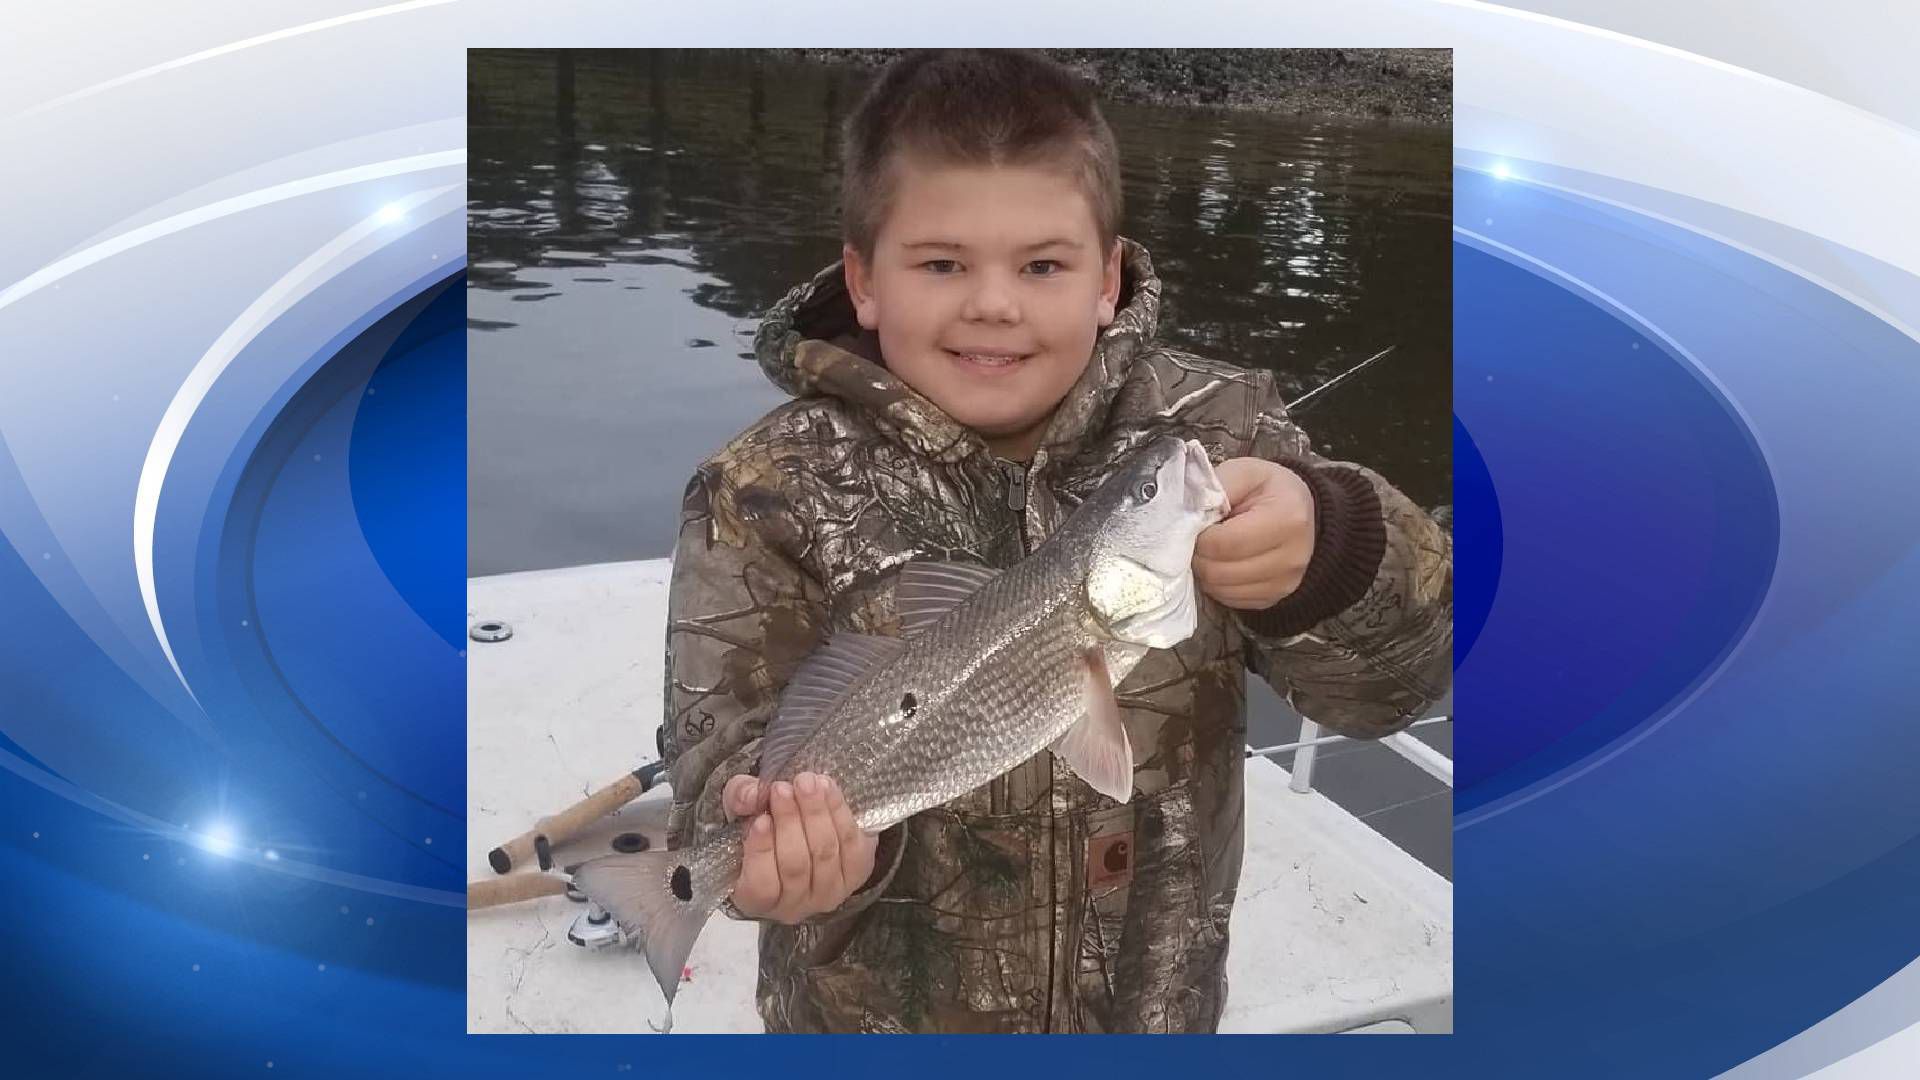 9-year-old boy killed in hunting accident, school district confirms